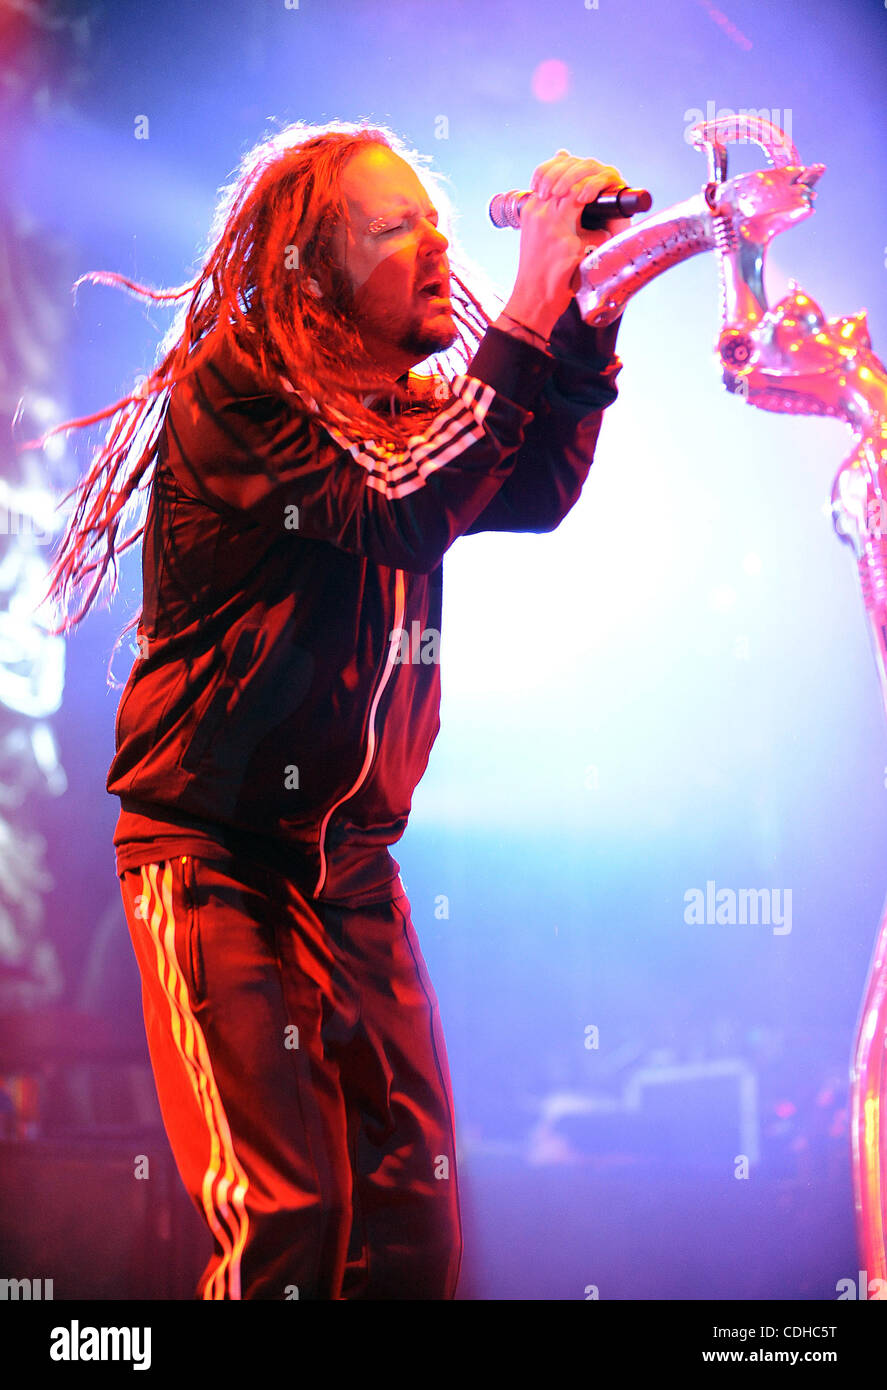 Feb. 2, 2011 - Fayetteville, North Carolina; USA - Singer JONATHAN DAVIS of the band Korn performs live as part of the Music As A Weapon Tour as it  makes a stop at the Crown Coliseum. Copyright 2011 Jason Moore. (Credit Image: © Jason Moore/ZUMAPRESS.com) Stock Photo